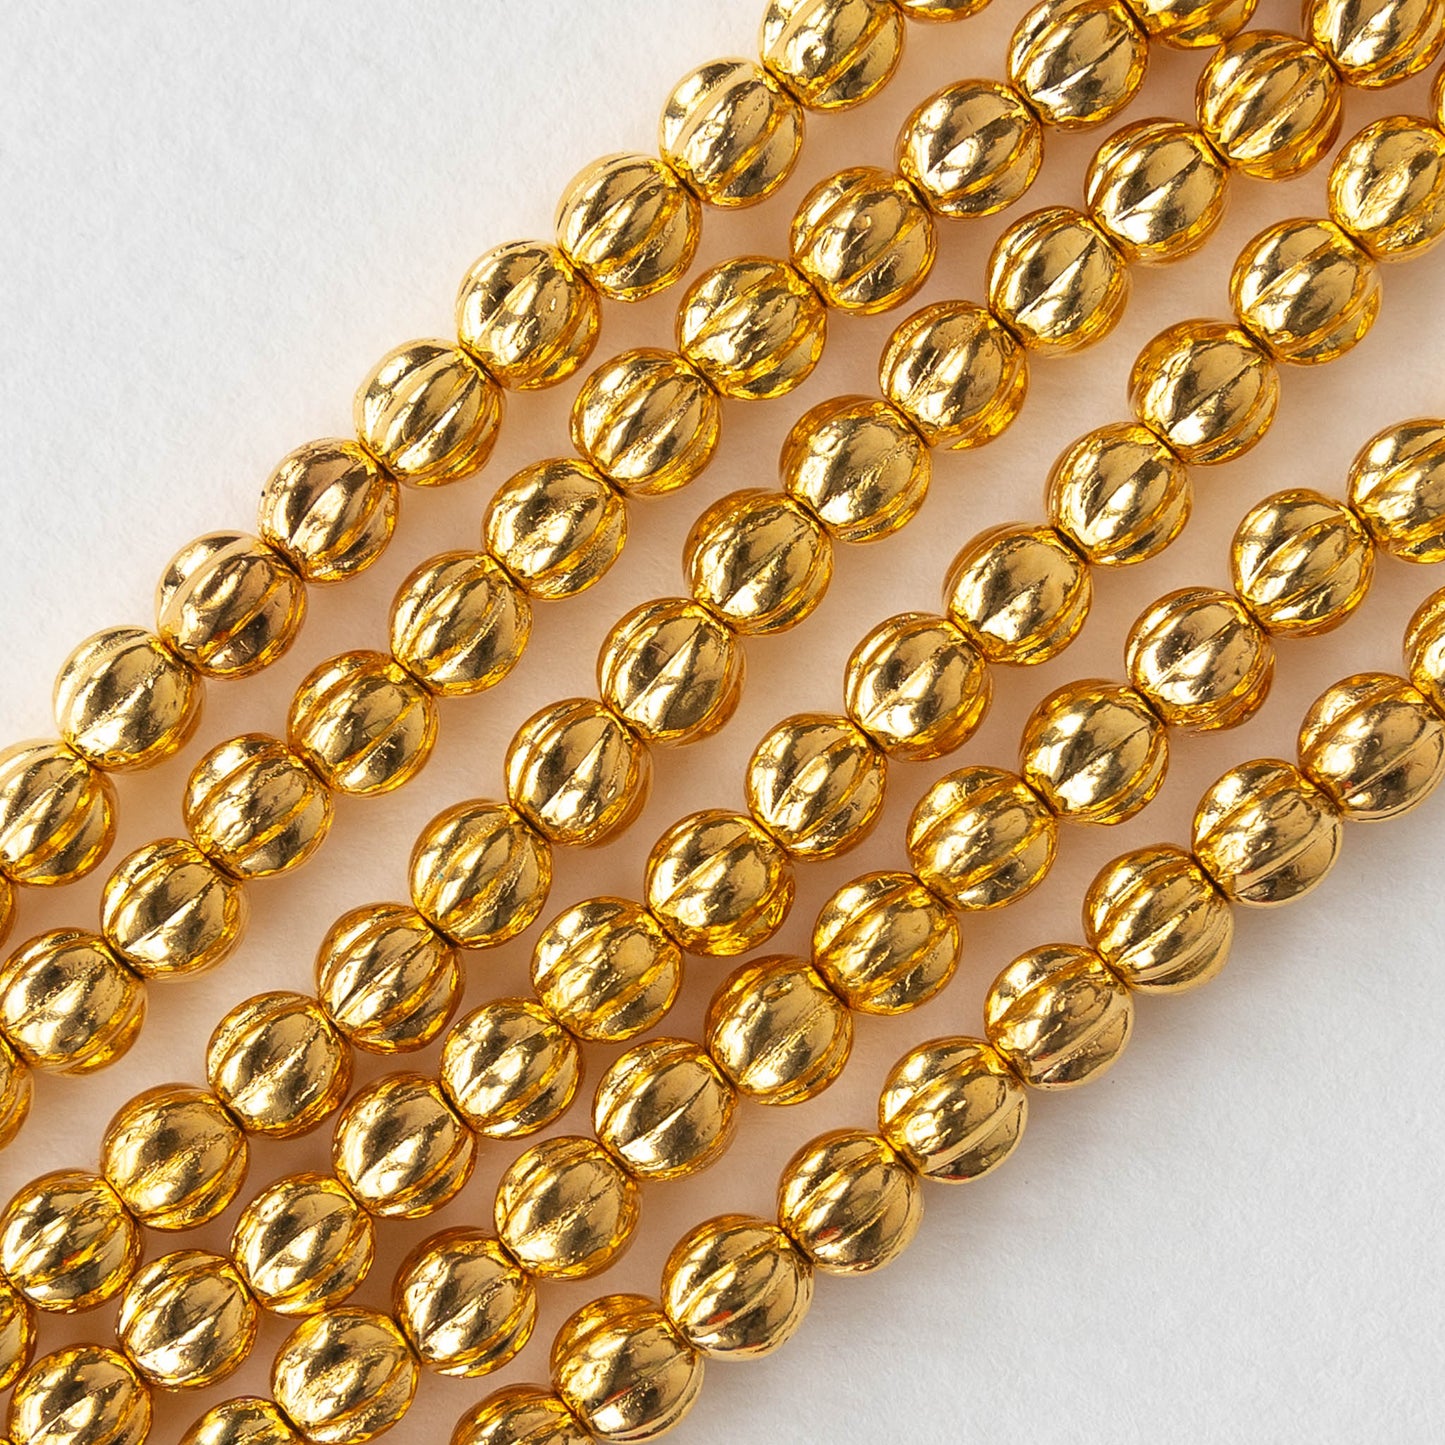 5mm Melon Bead - 24K Gold Plated Glass - 25 Beads